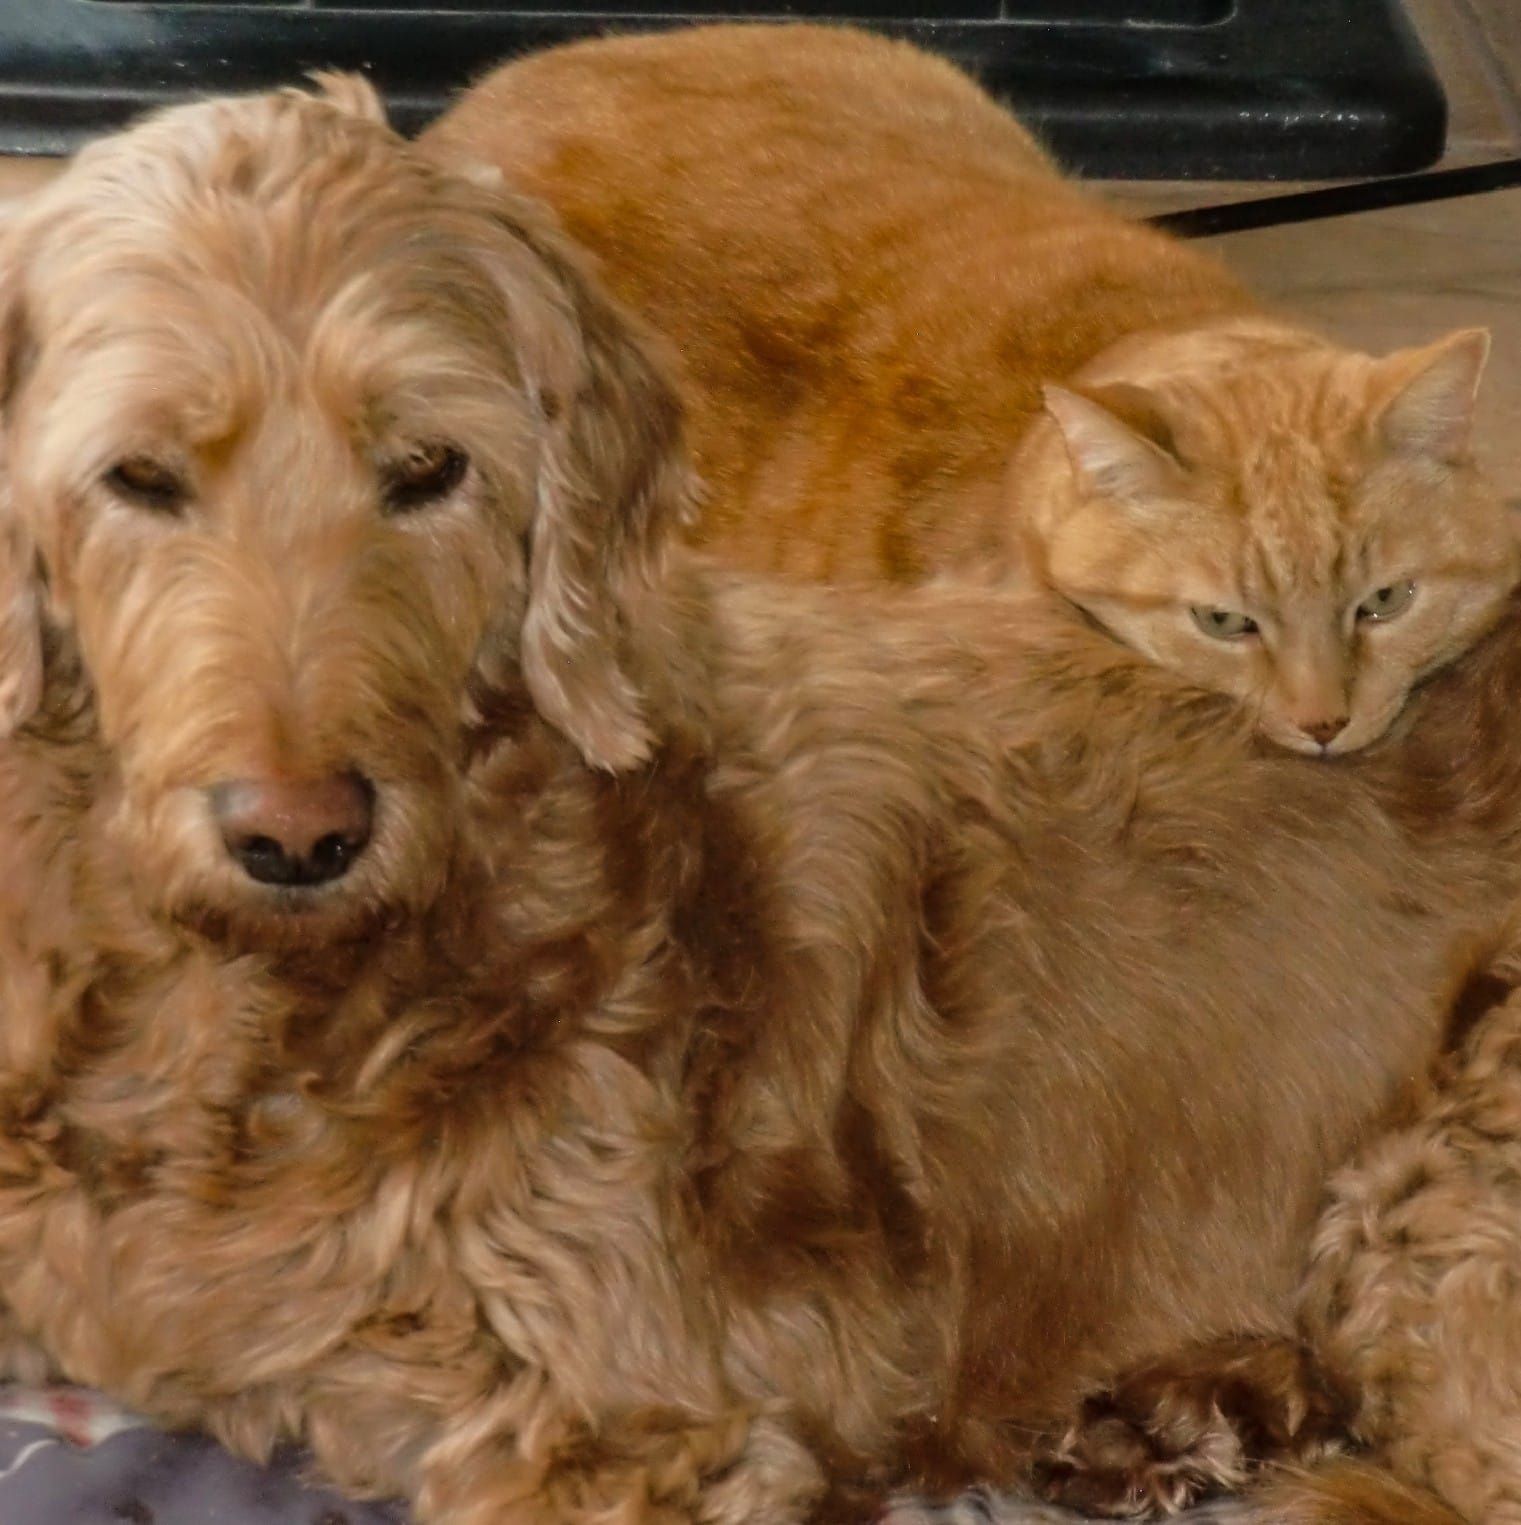 Cat and dogs 12-year-old friendship wins hearts